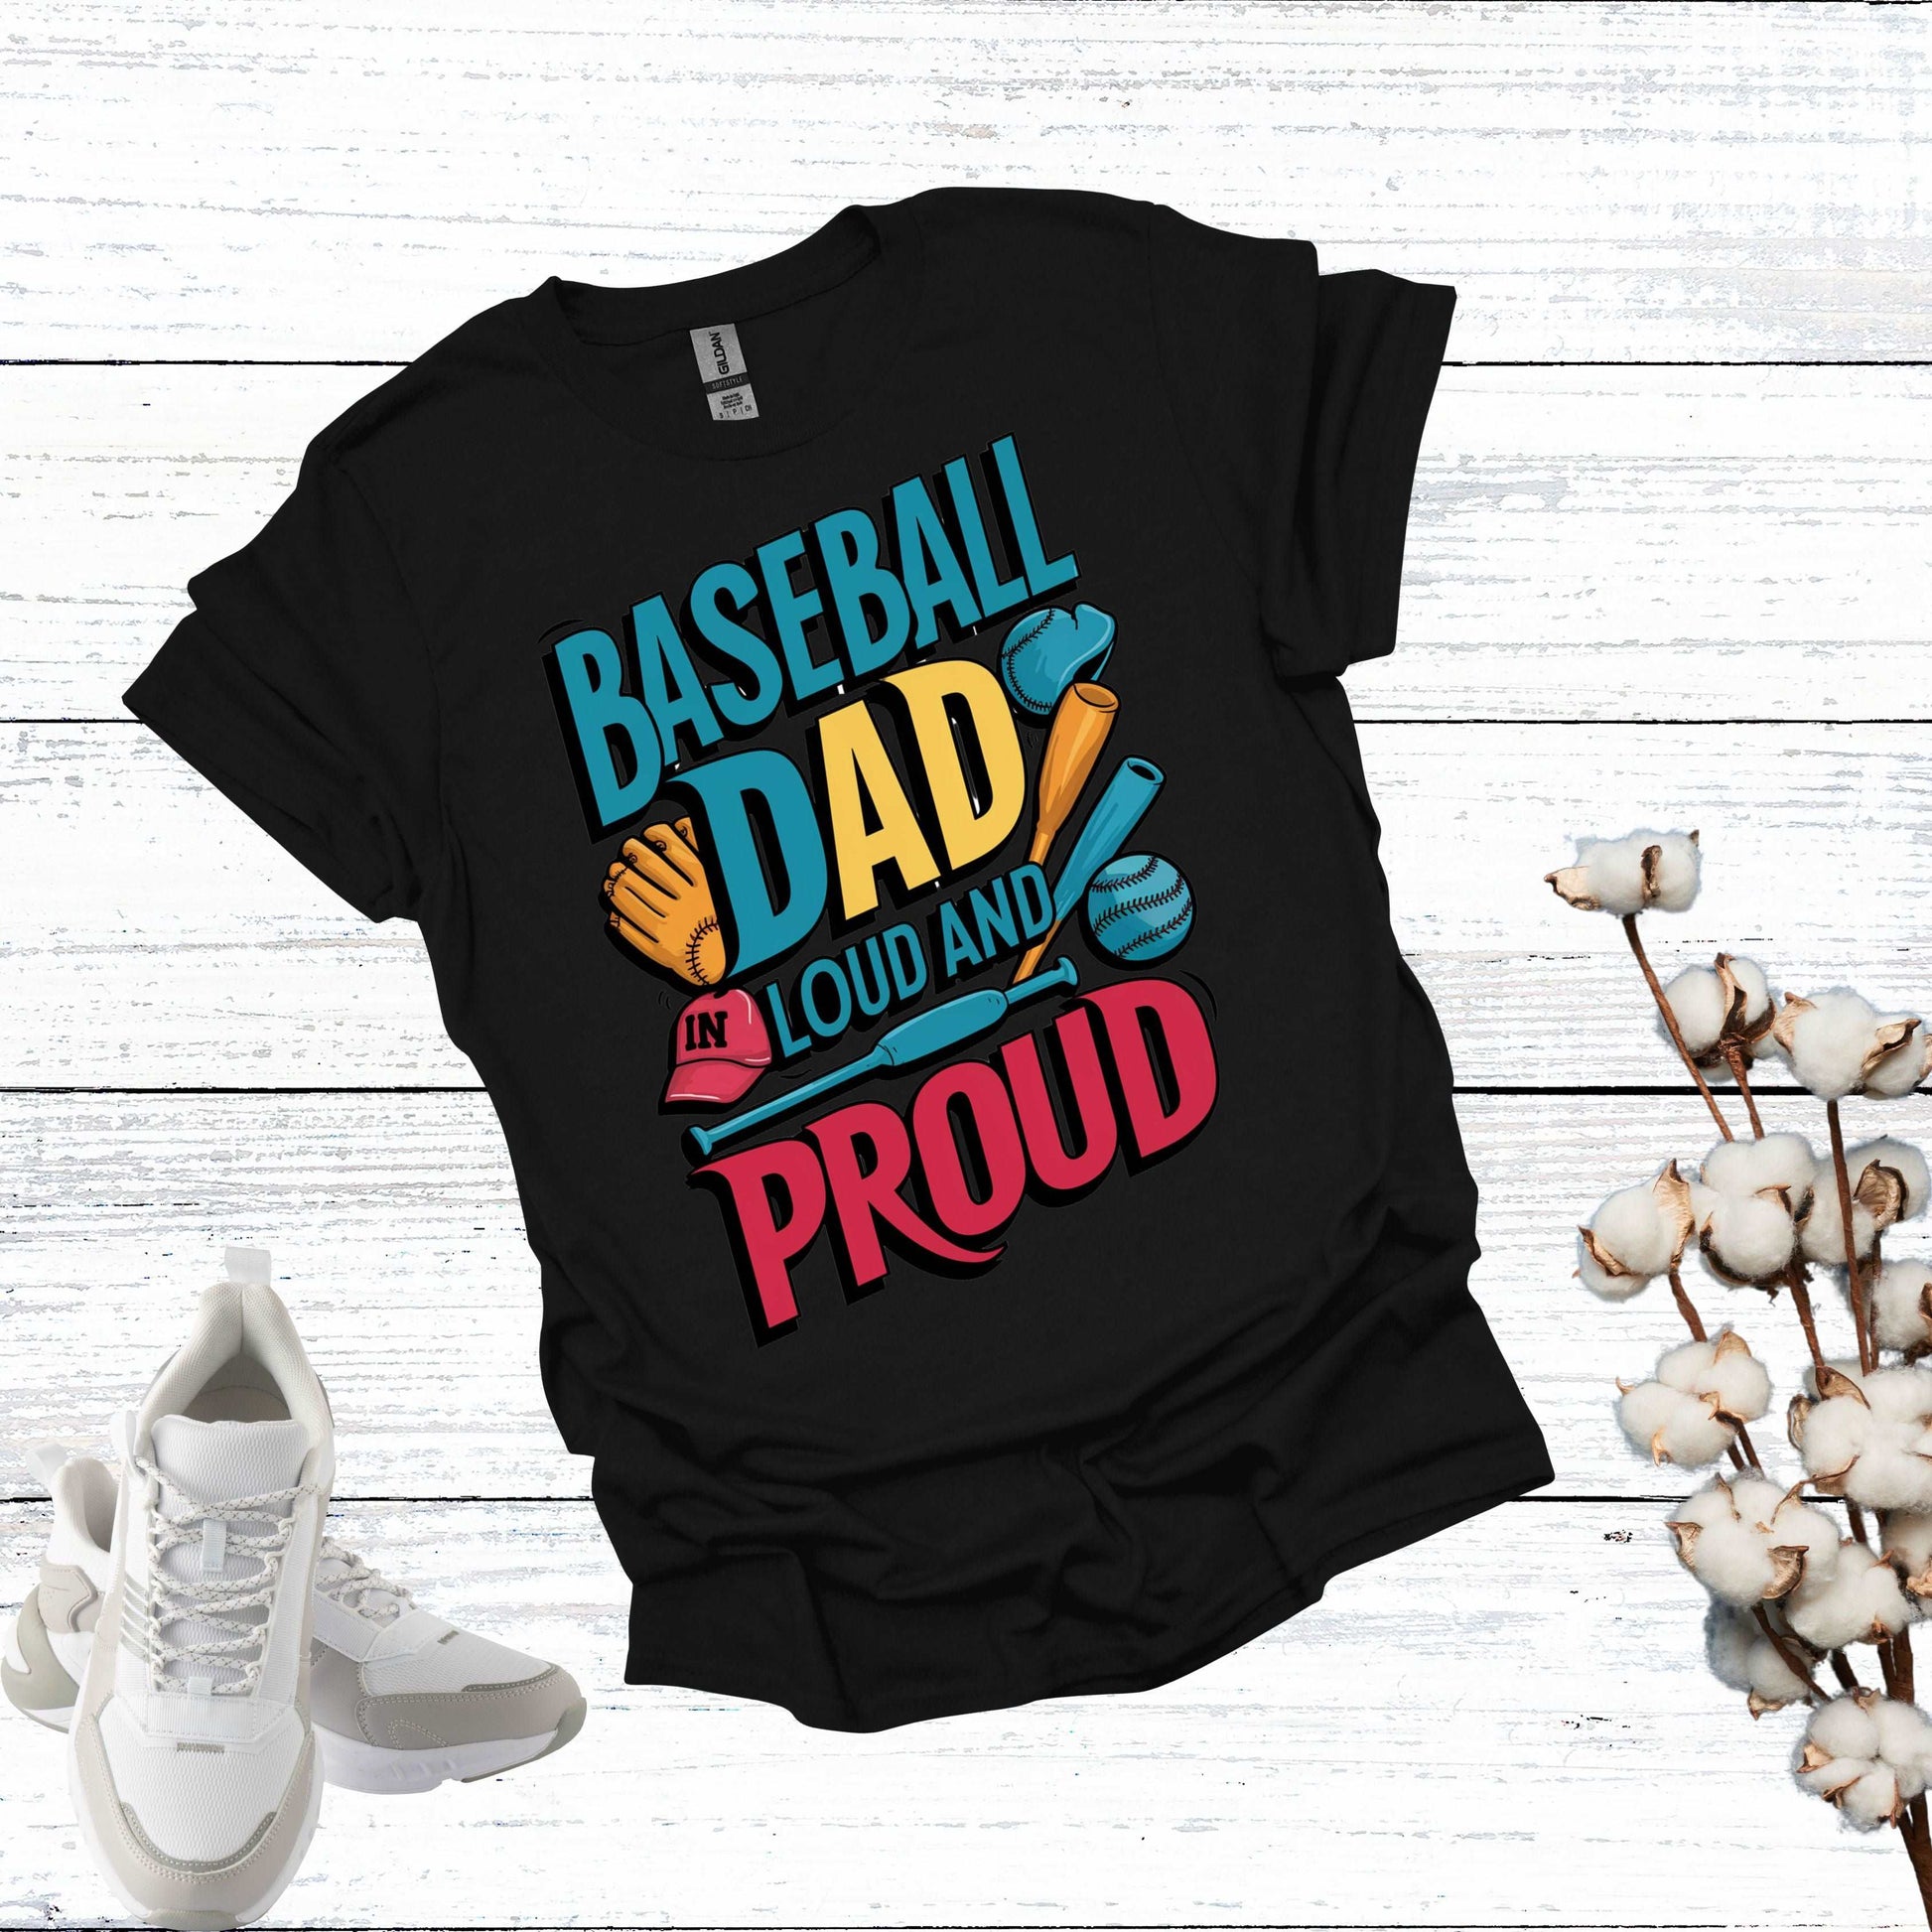 Baseball Dad Black Shirt - Fathers are Loud and Proud